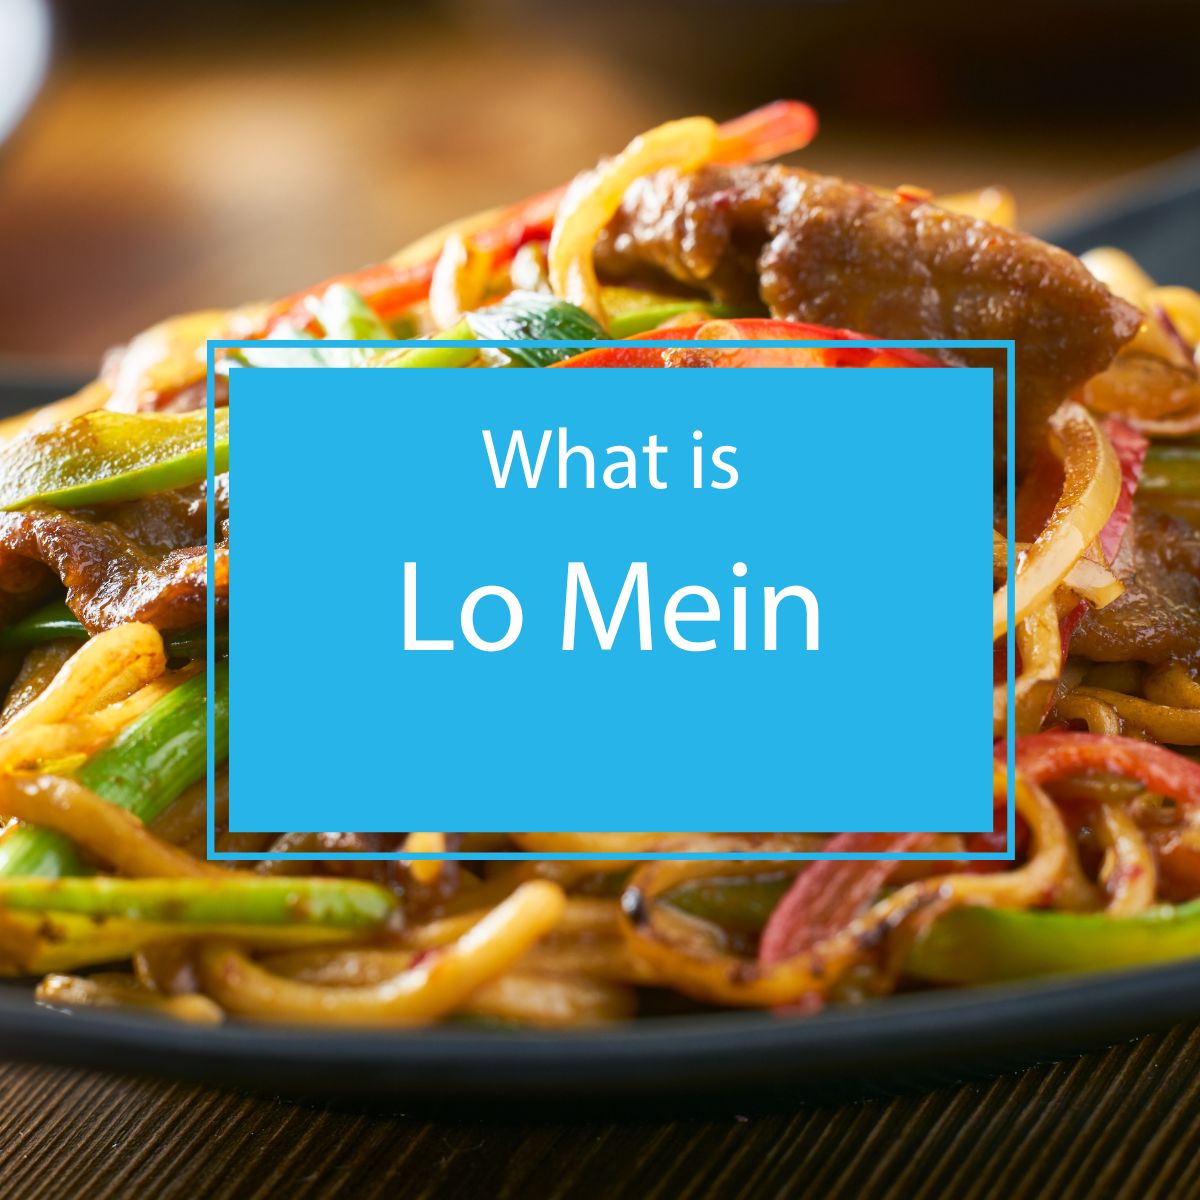 What is lo mein